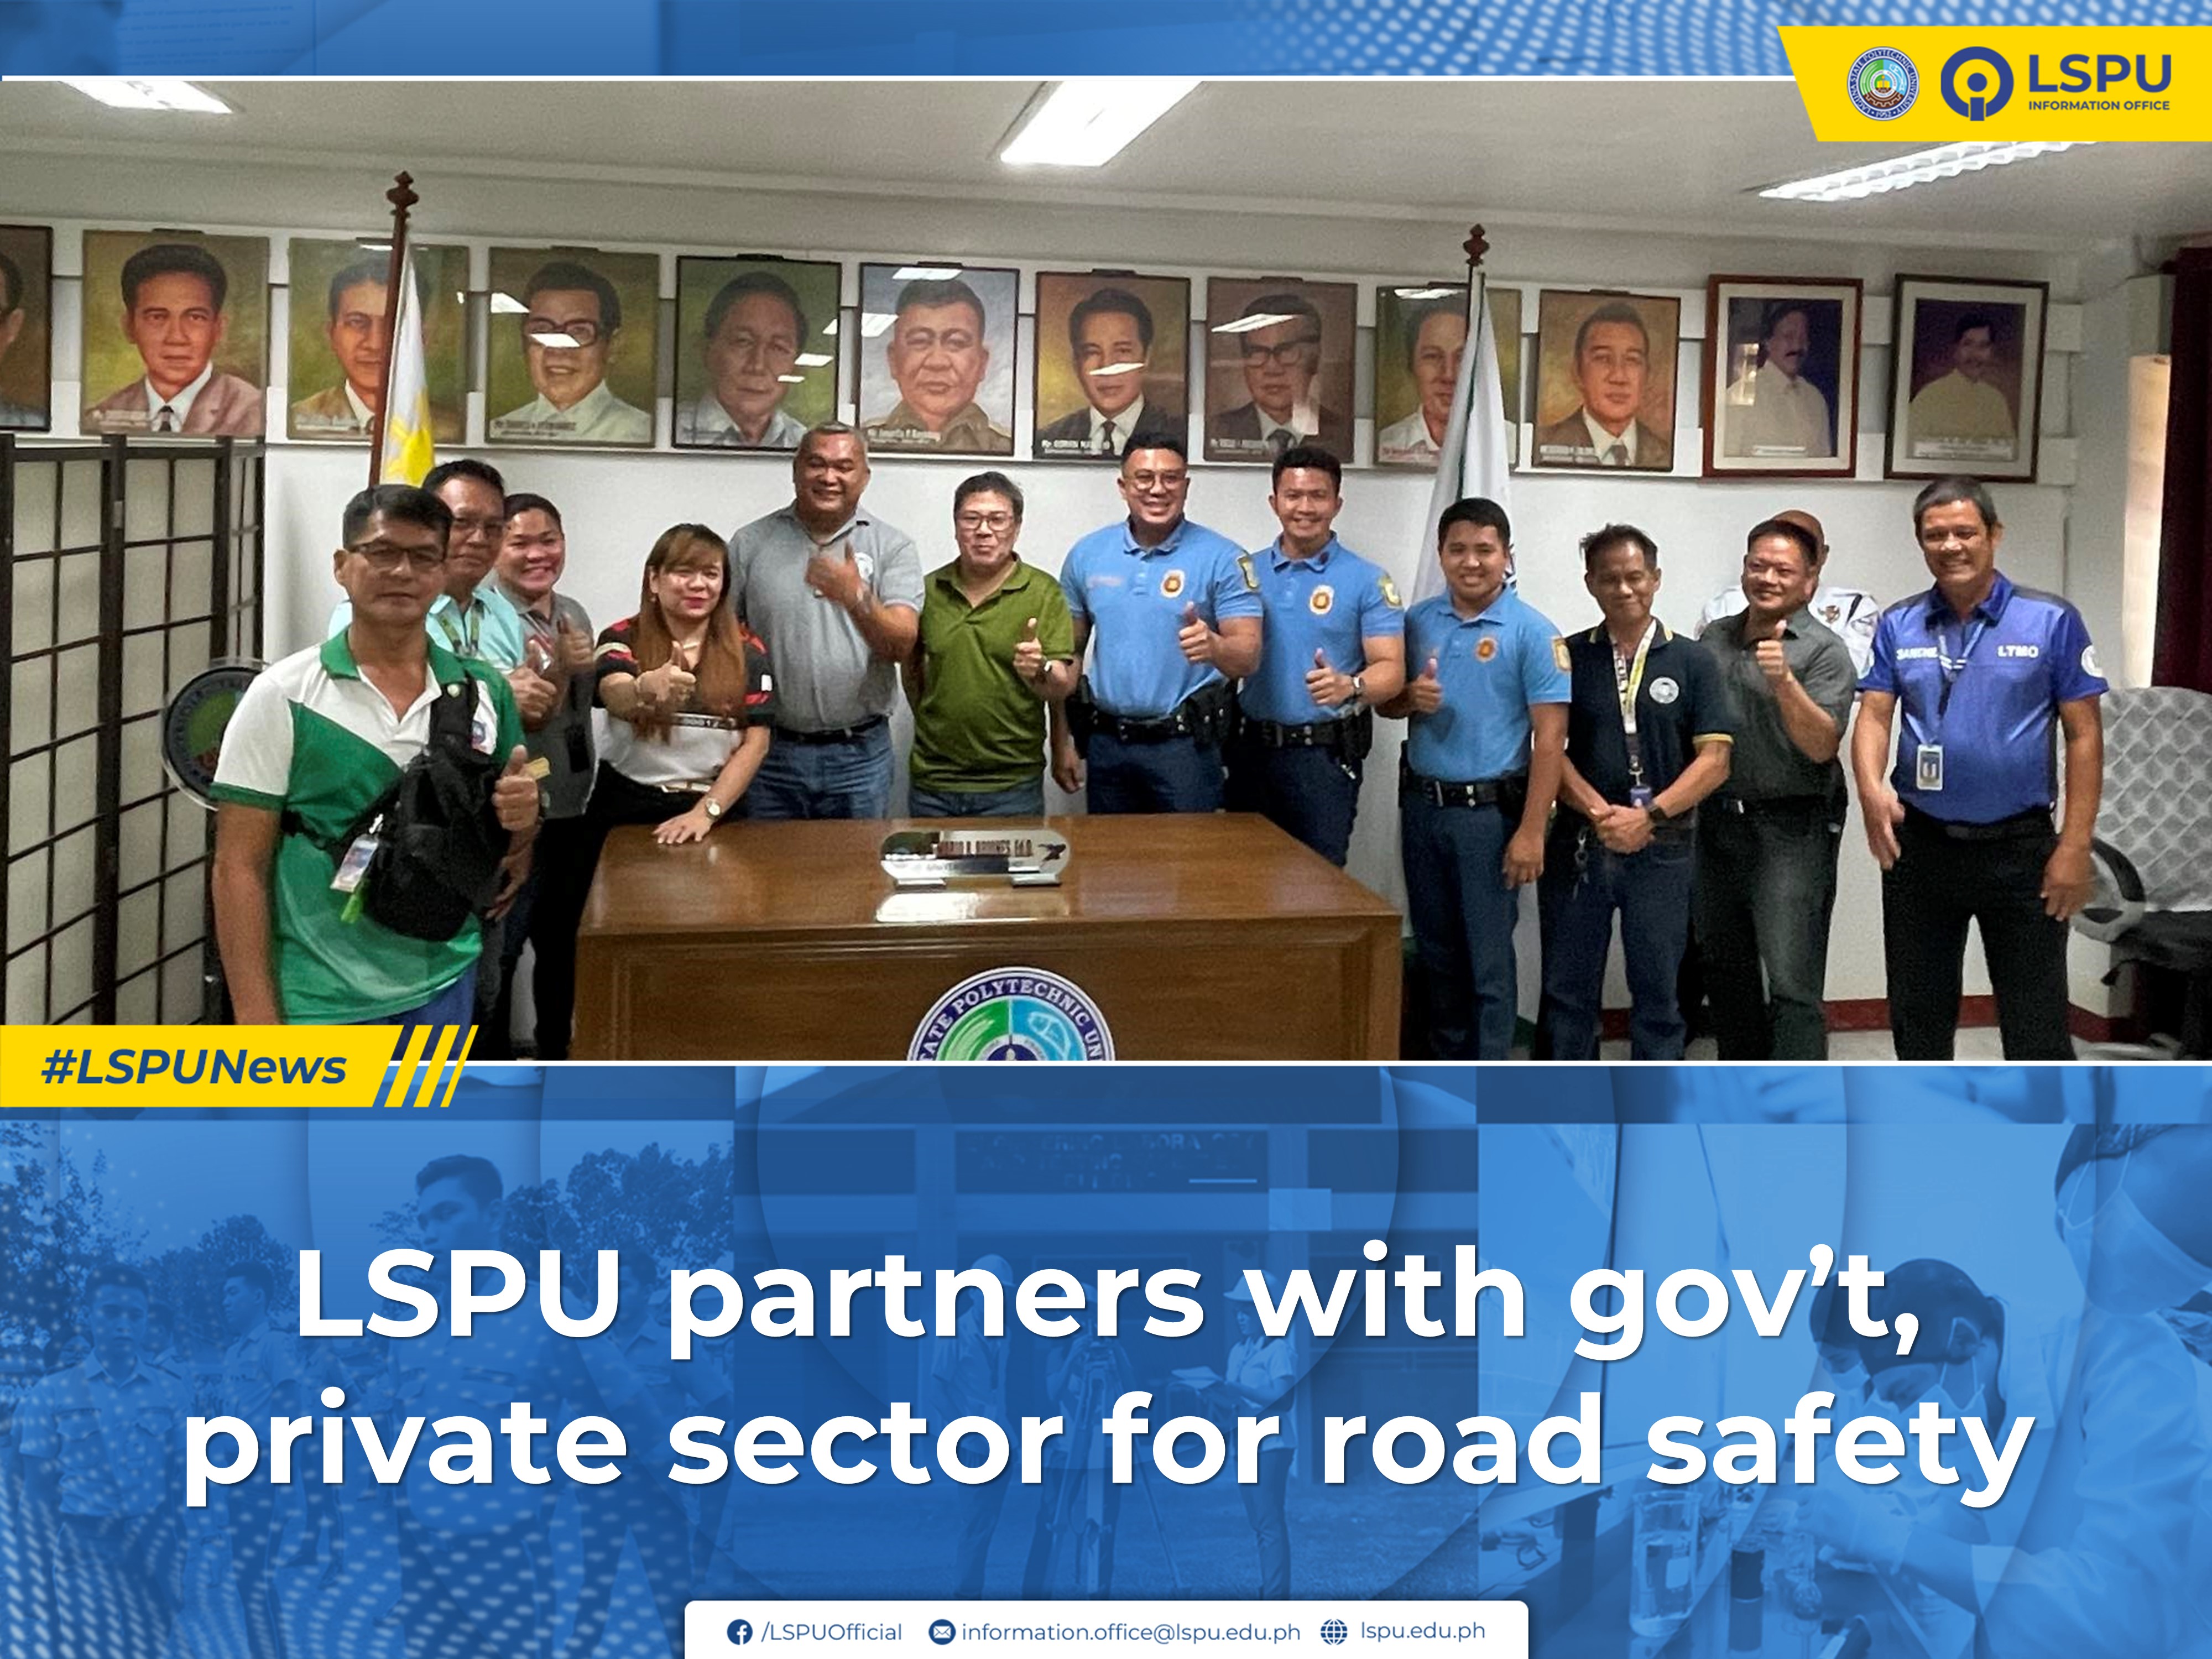 LSPU partners with gov't, private sector for road safety